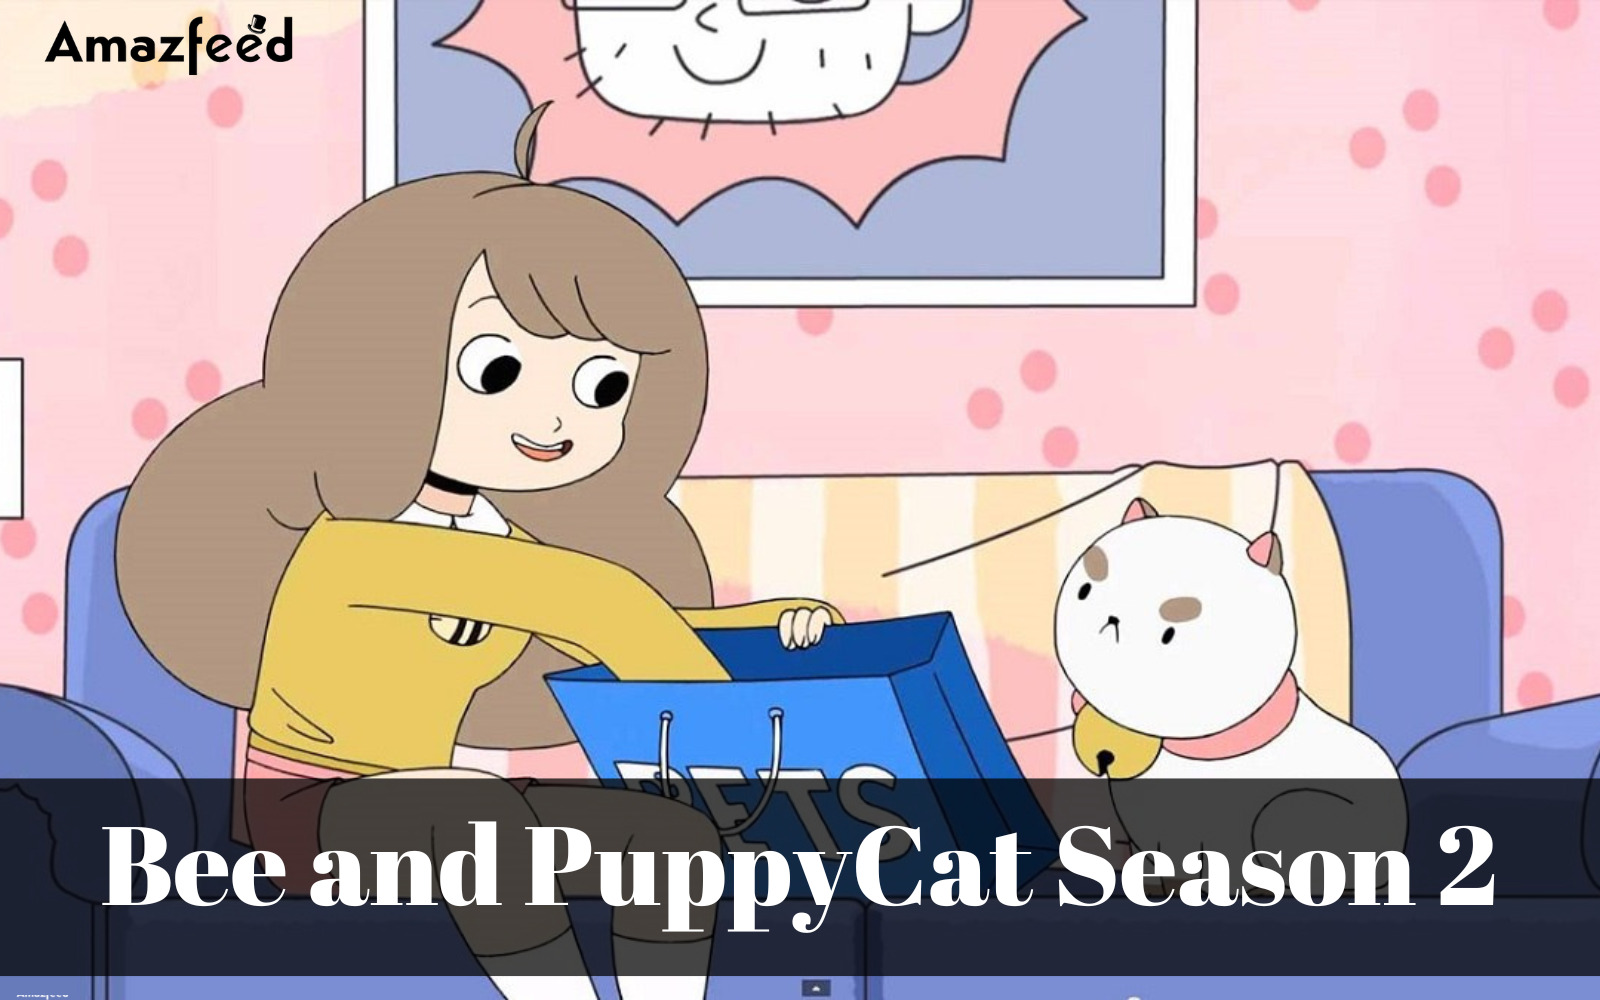 When Is Bee and PuppyCat Season 2 Coming Out (Release Date)